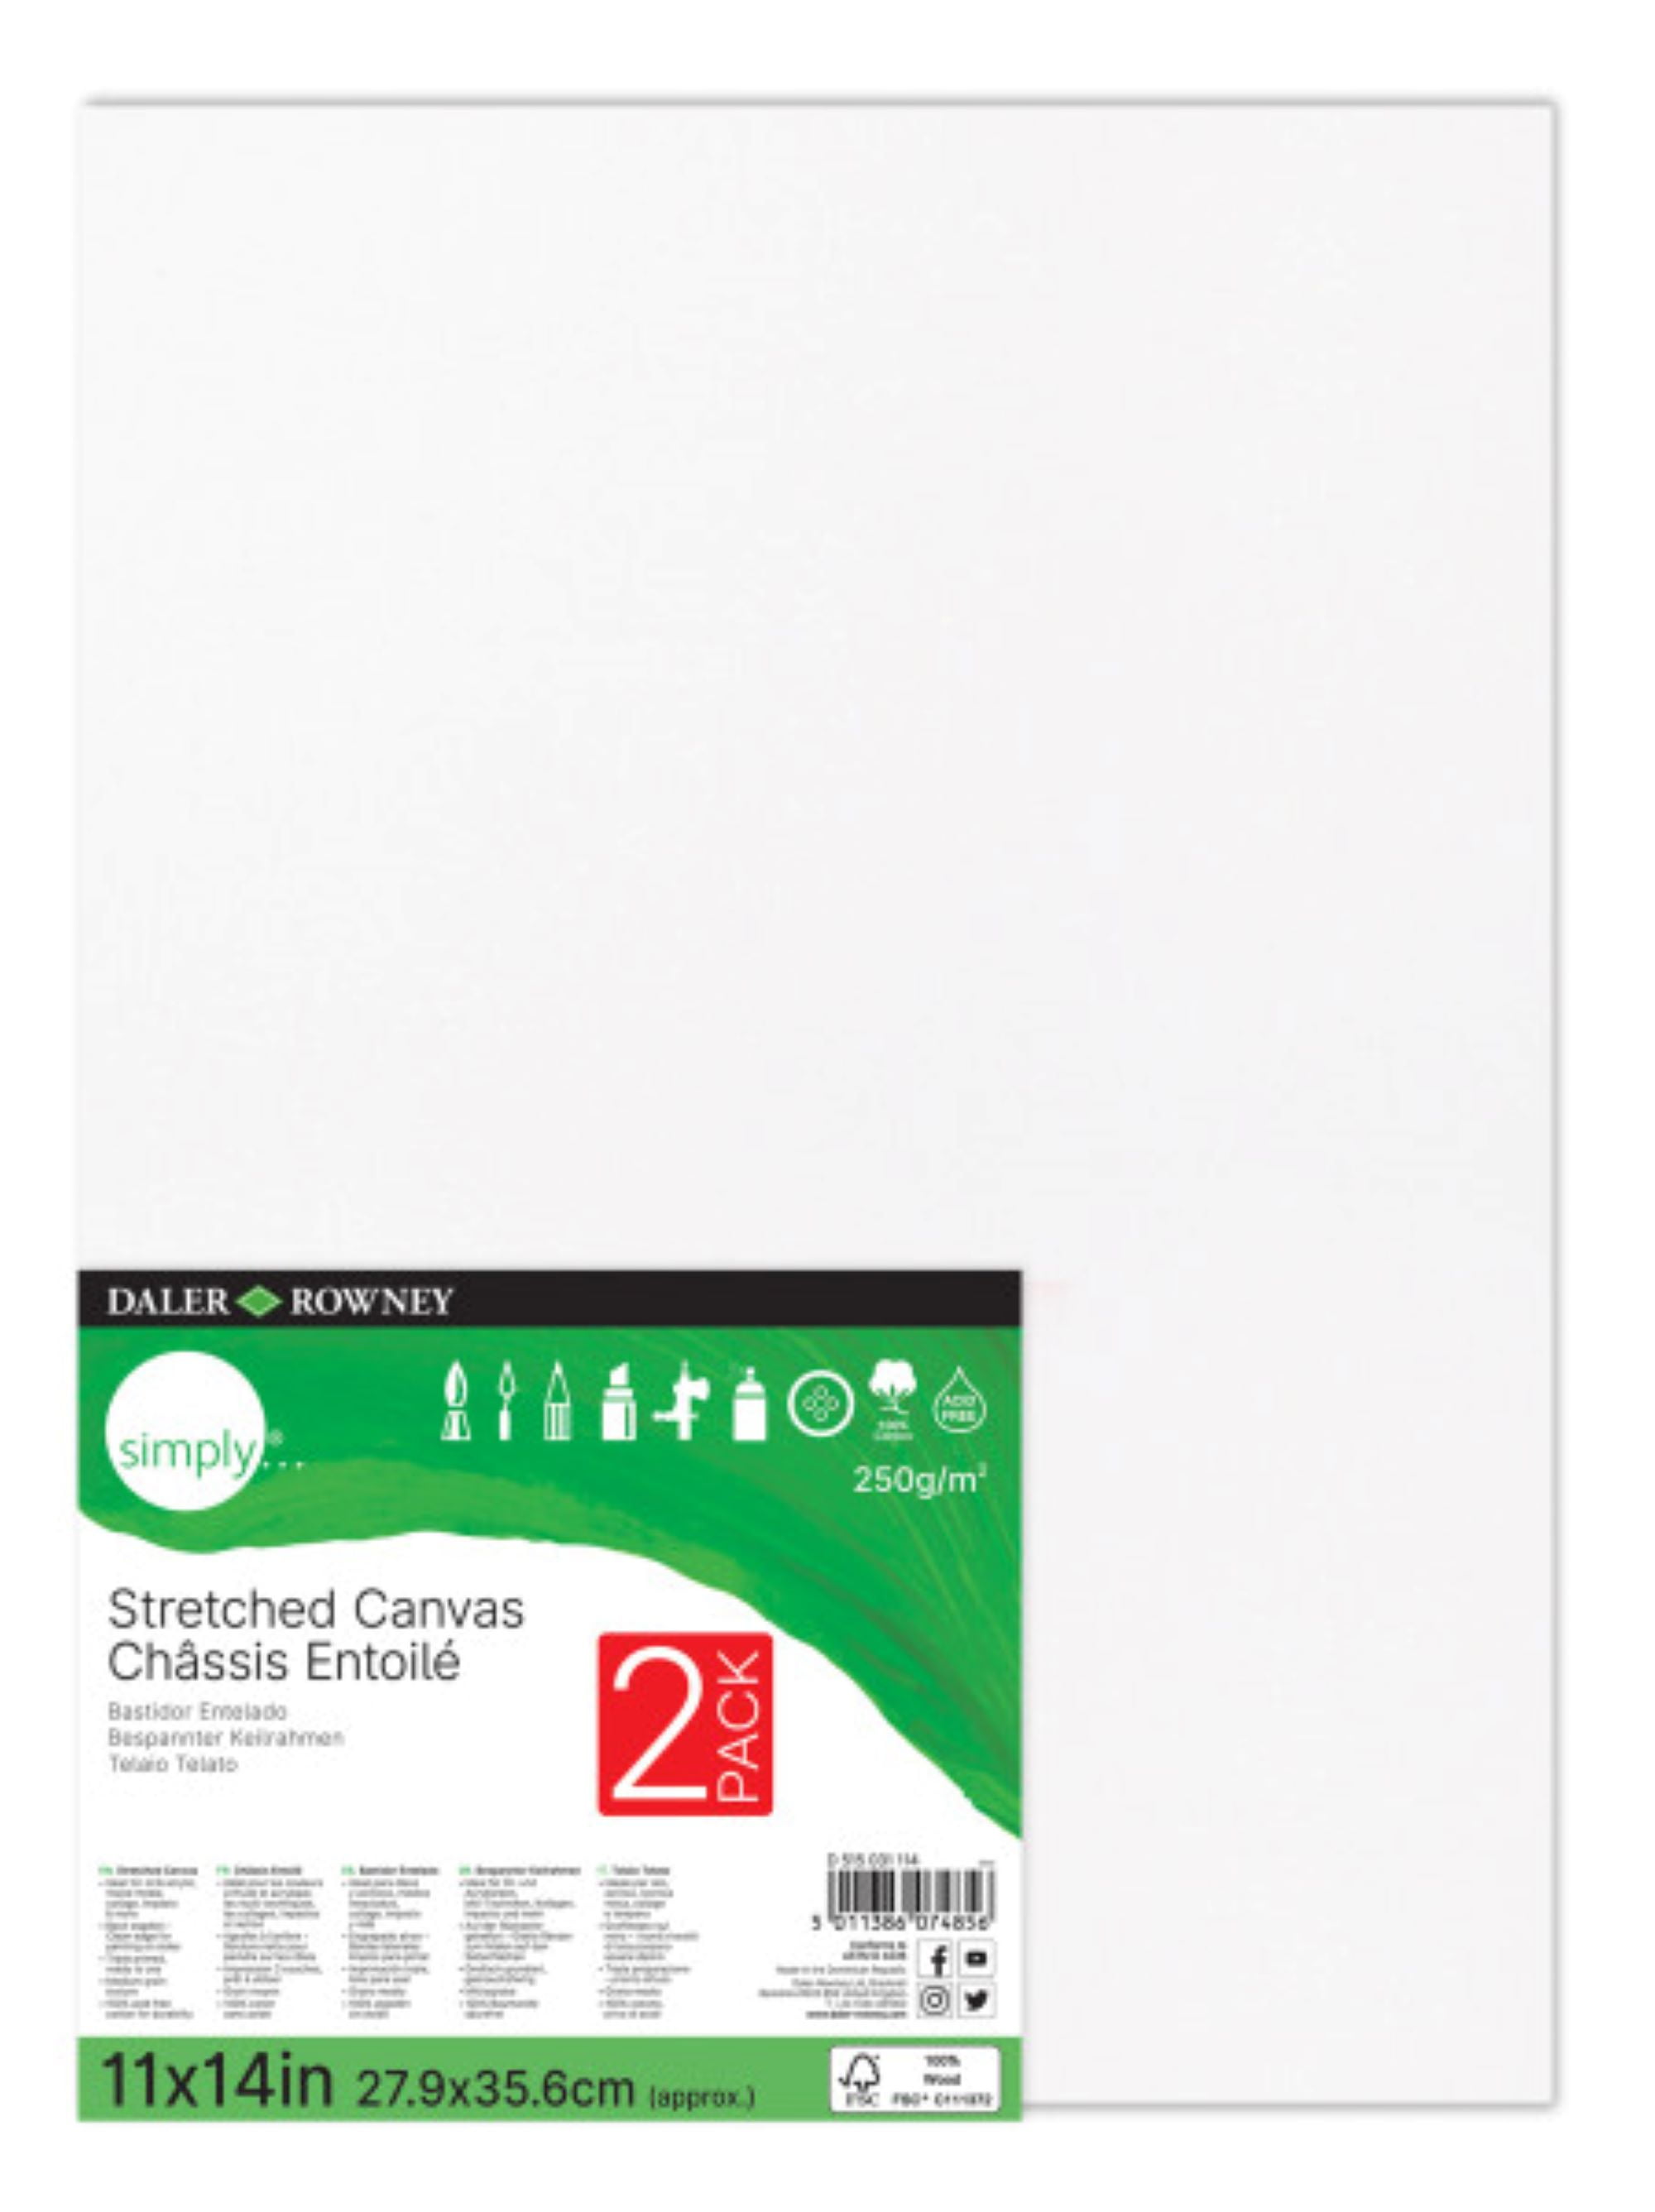 Daler-Rowney Simply Stretched Canvas, White Art Canvas,